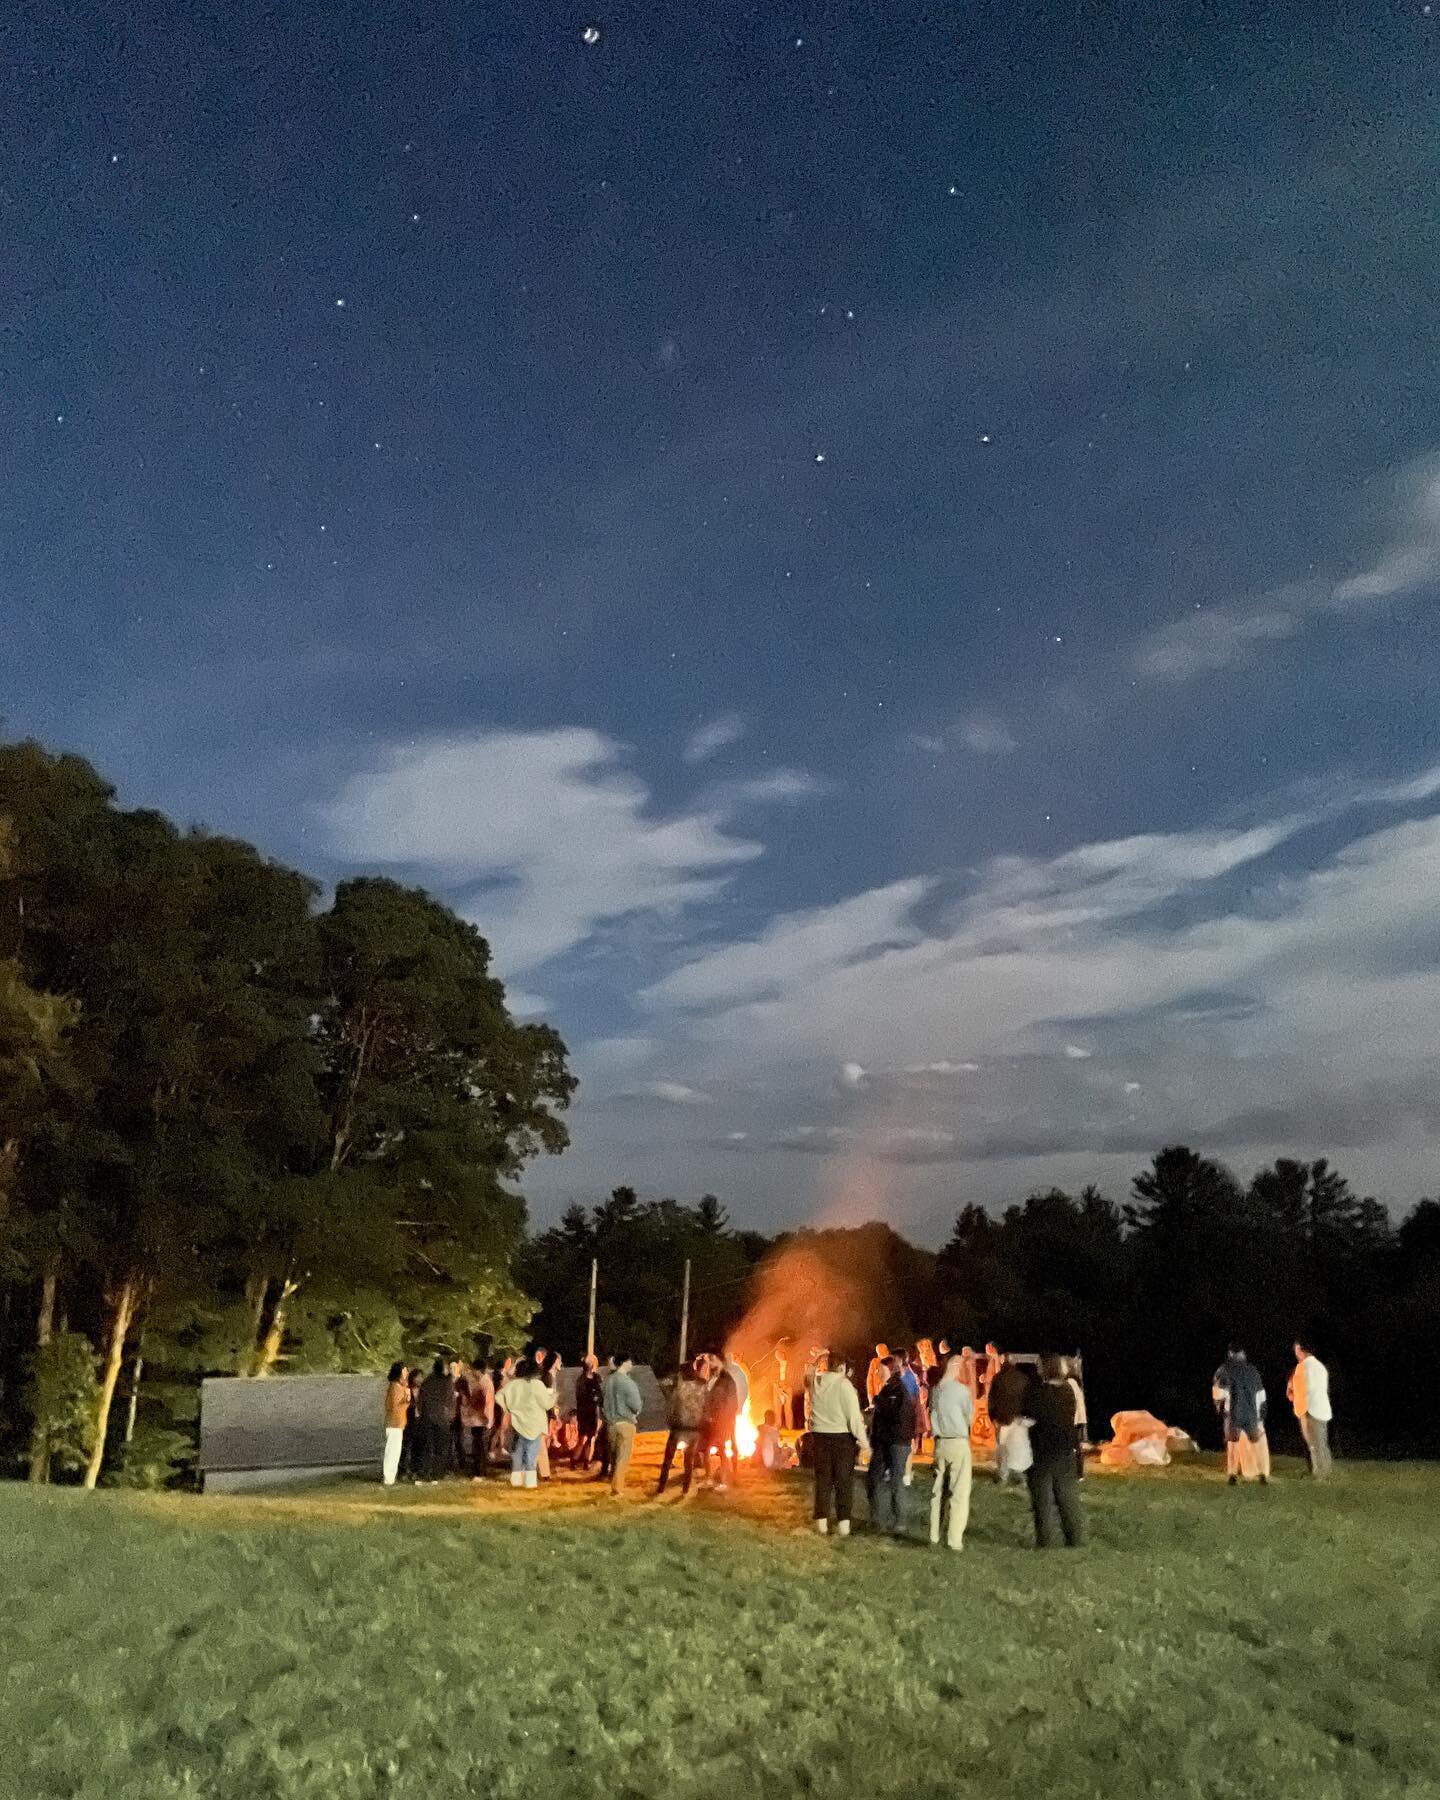 🔥We are on fire. We have always been on fire. We will continue to be on fire 🔥

Holding on to many moments from an intensive, beautiful, expansive, connecting, challenging summer at Skowhegan with so many new friends.